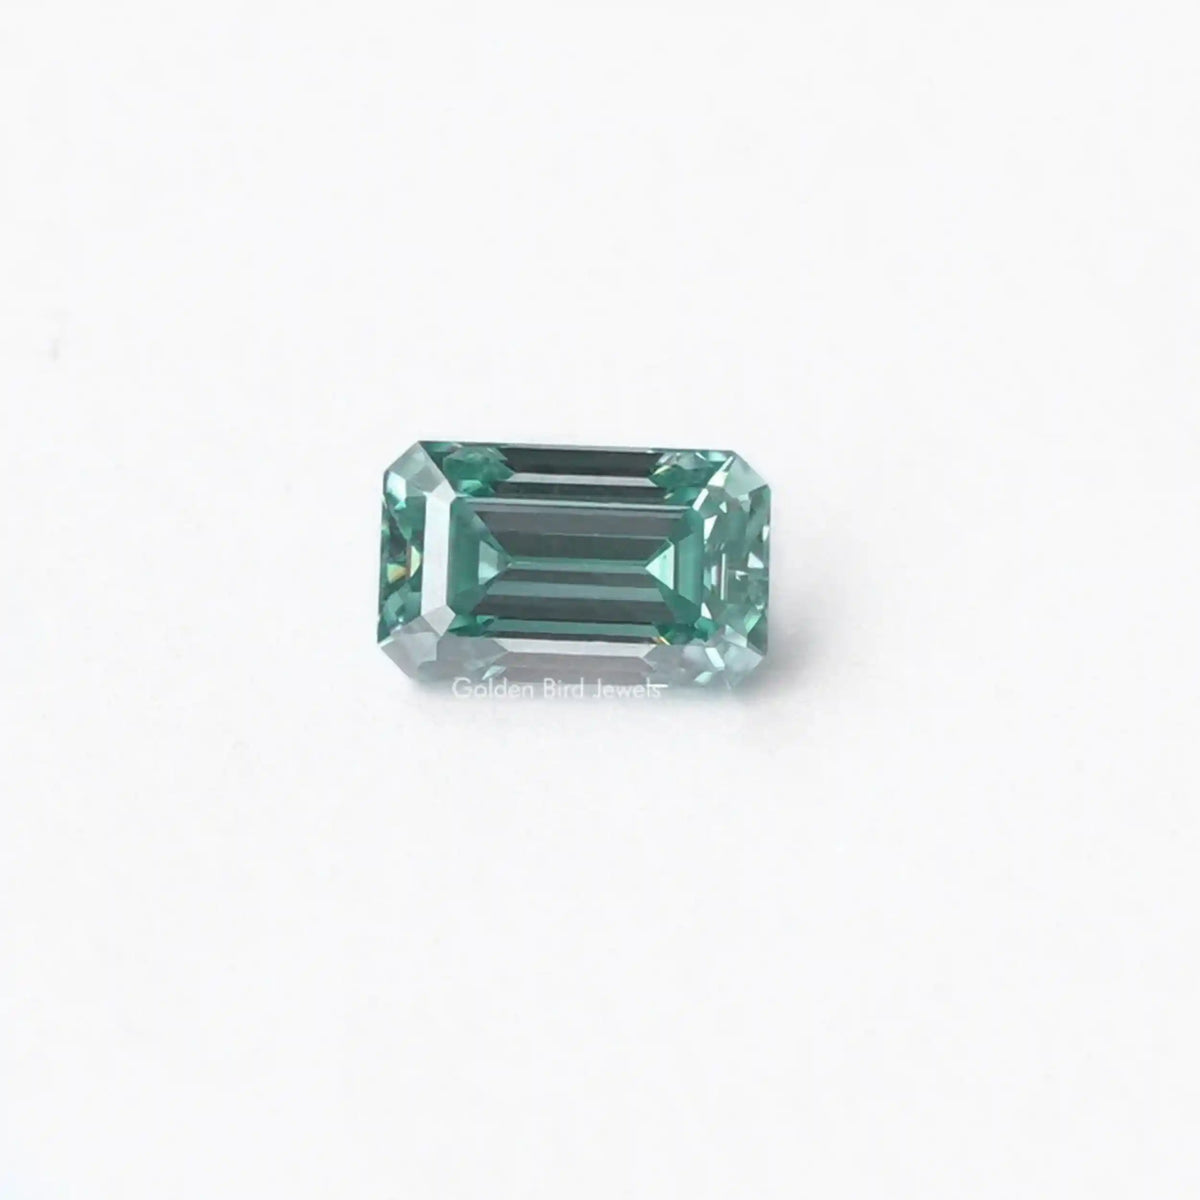 [Front view of emerald cut loose stone made of blue color]-[Golden Bird Jewels]